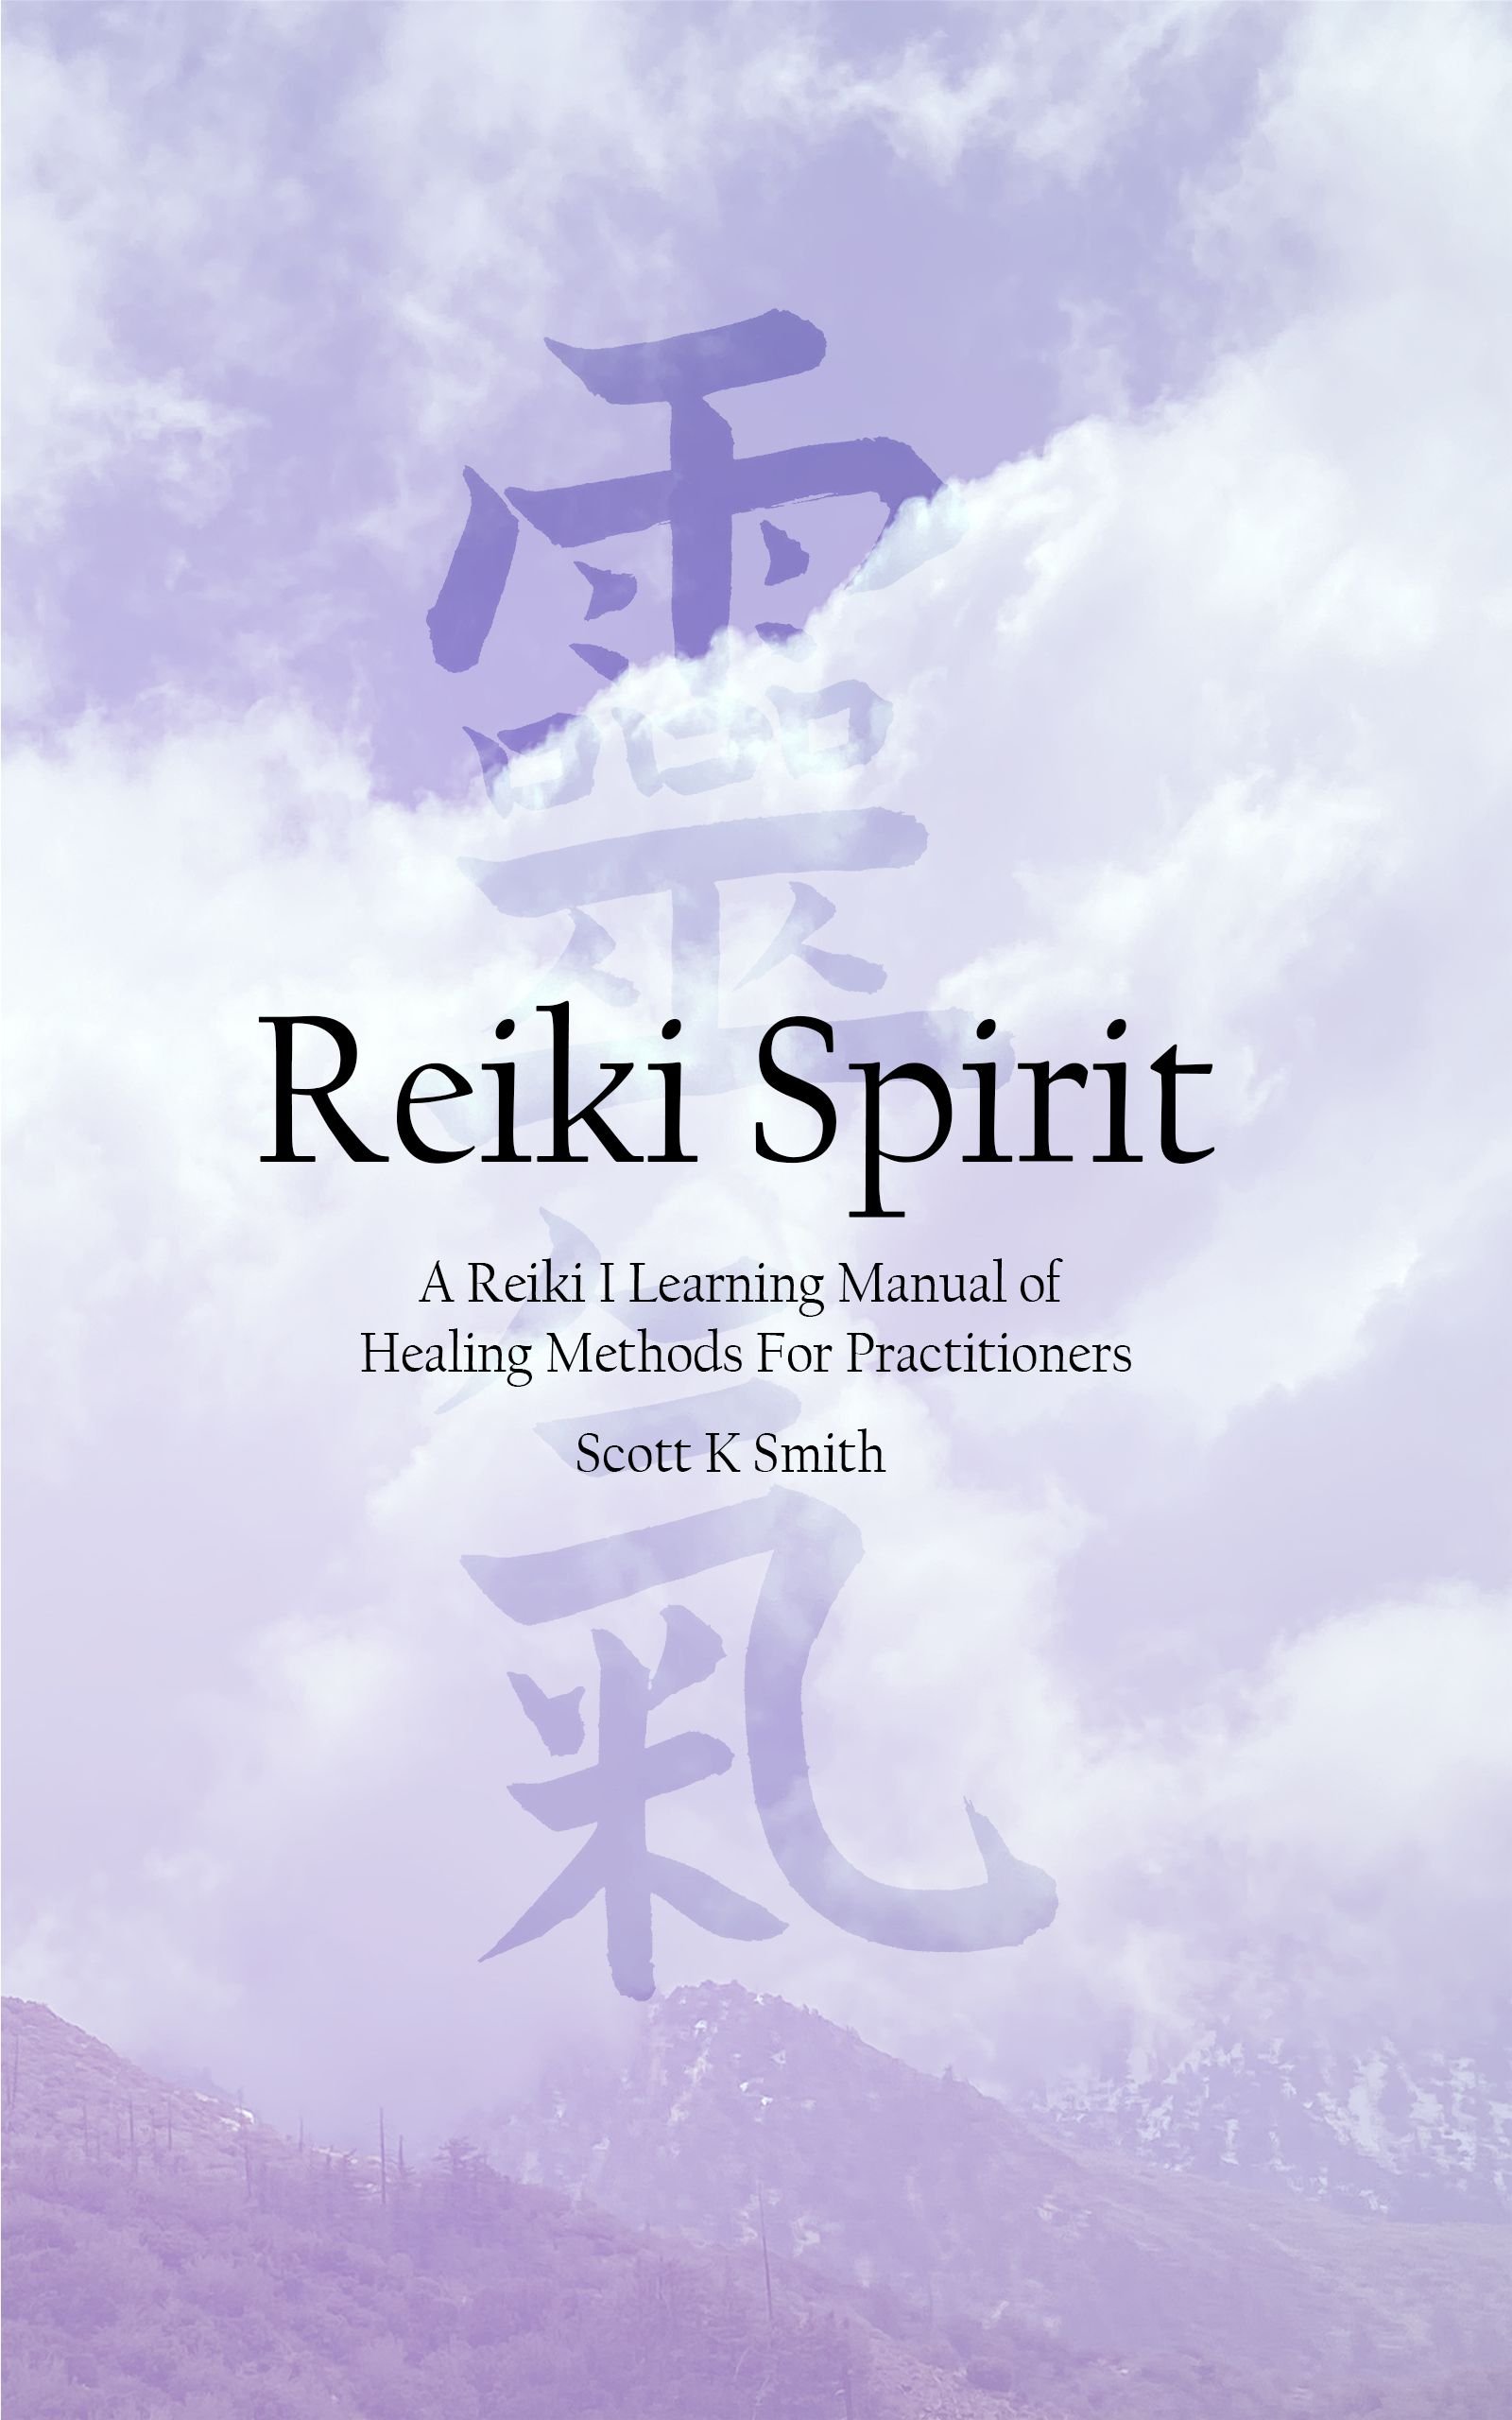 Reiki Spirit: A Reiki I Learning Manual of Healing Methods For Practitioners